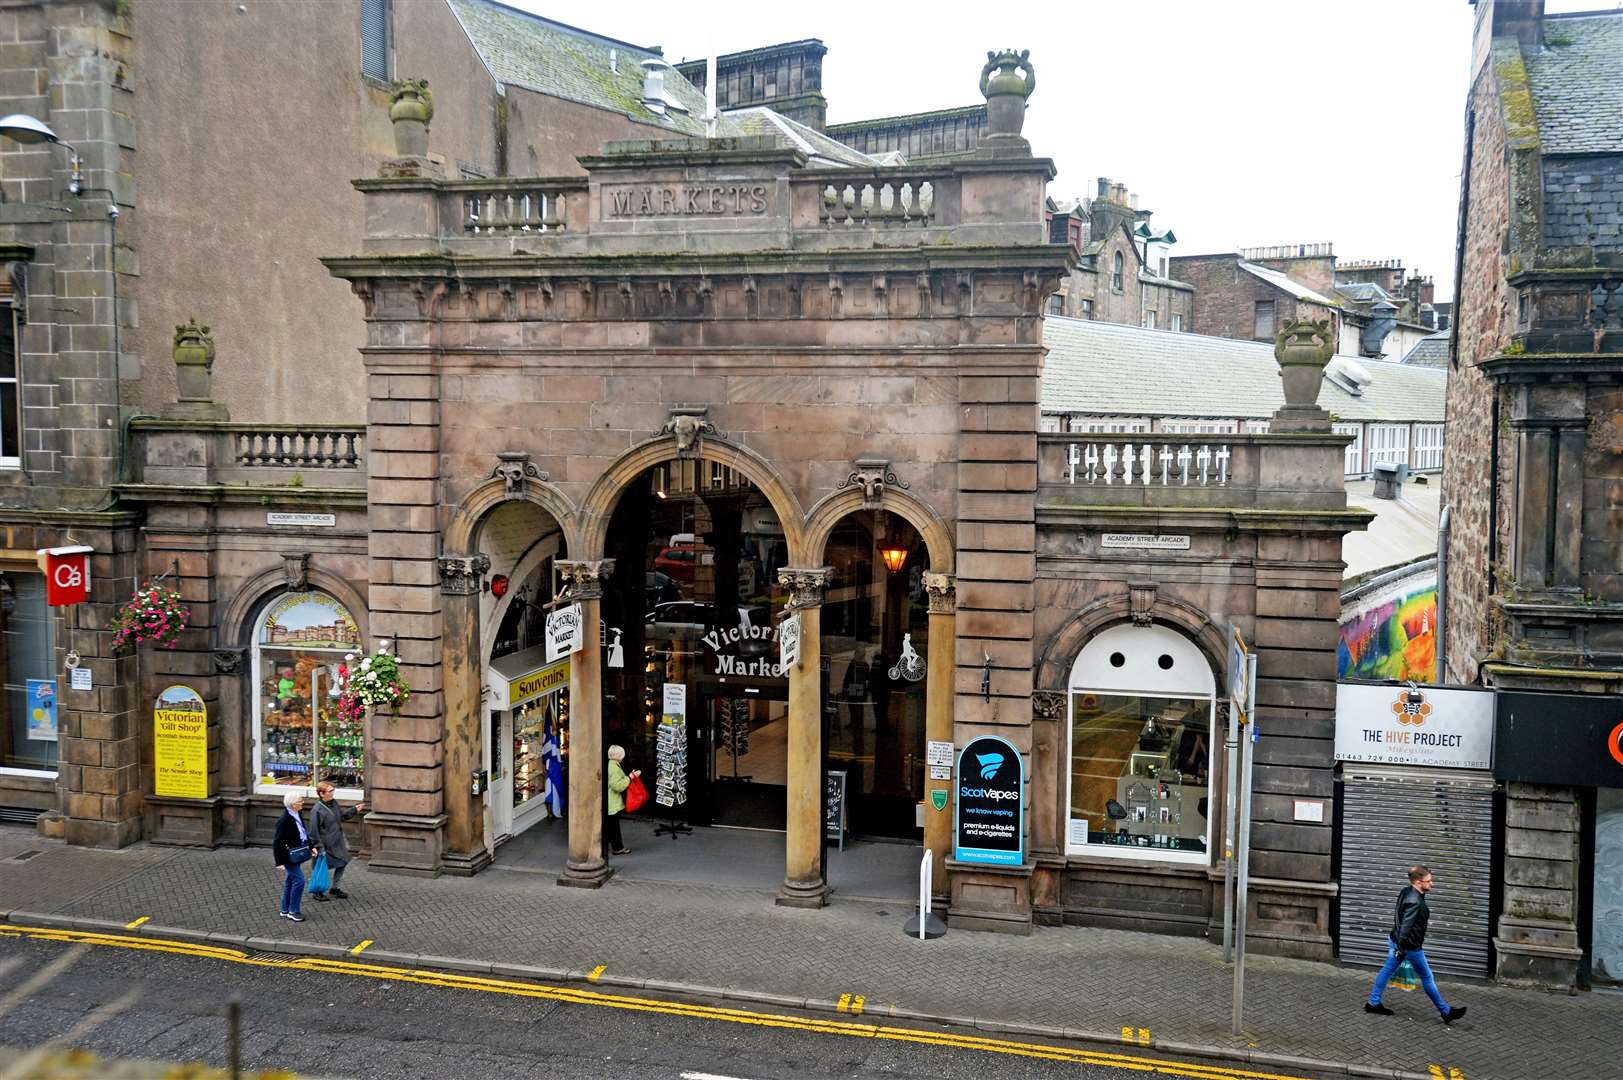 One of the entrances to the Victorian Market.